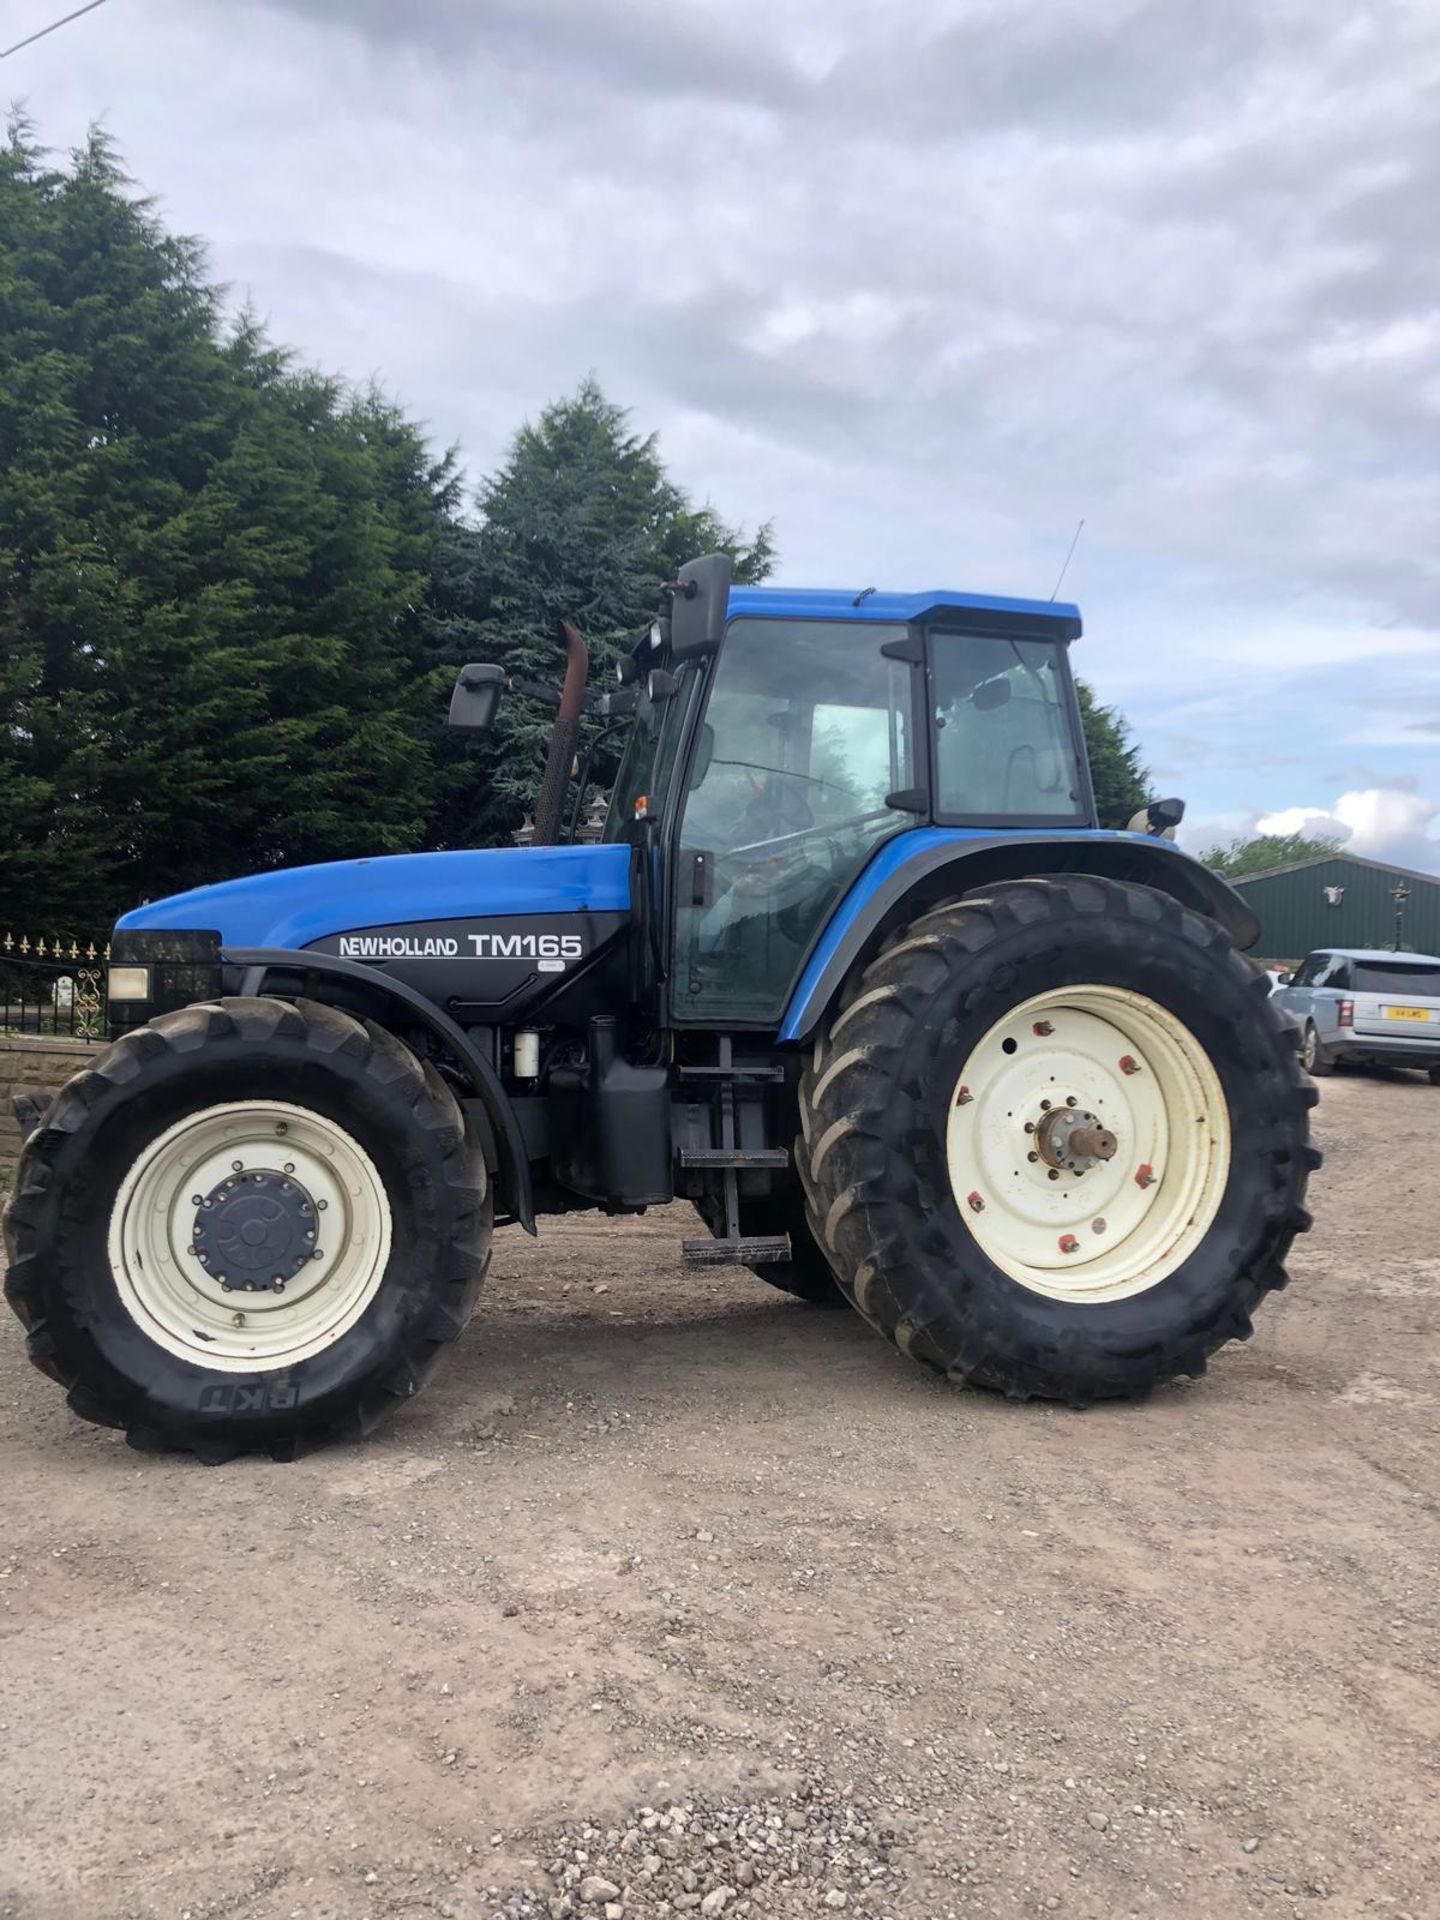 2001 NEWHOLLAND TM165 TRACTOR, CAB HEATER, 4 WHEEL DRIVE, POWER STEERING, DIFF LOCK, 50K GEARBOX - Image 3 of 7